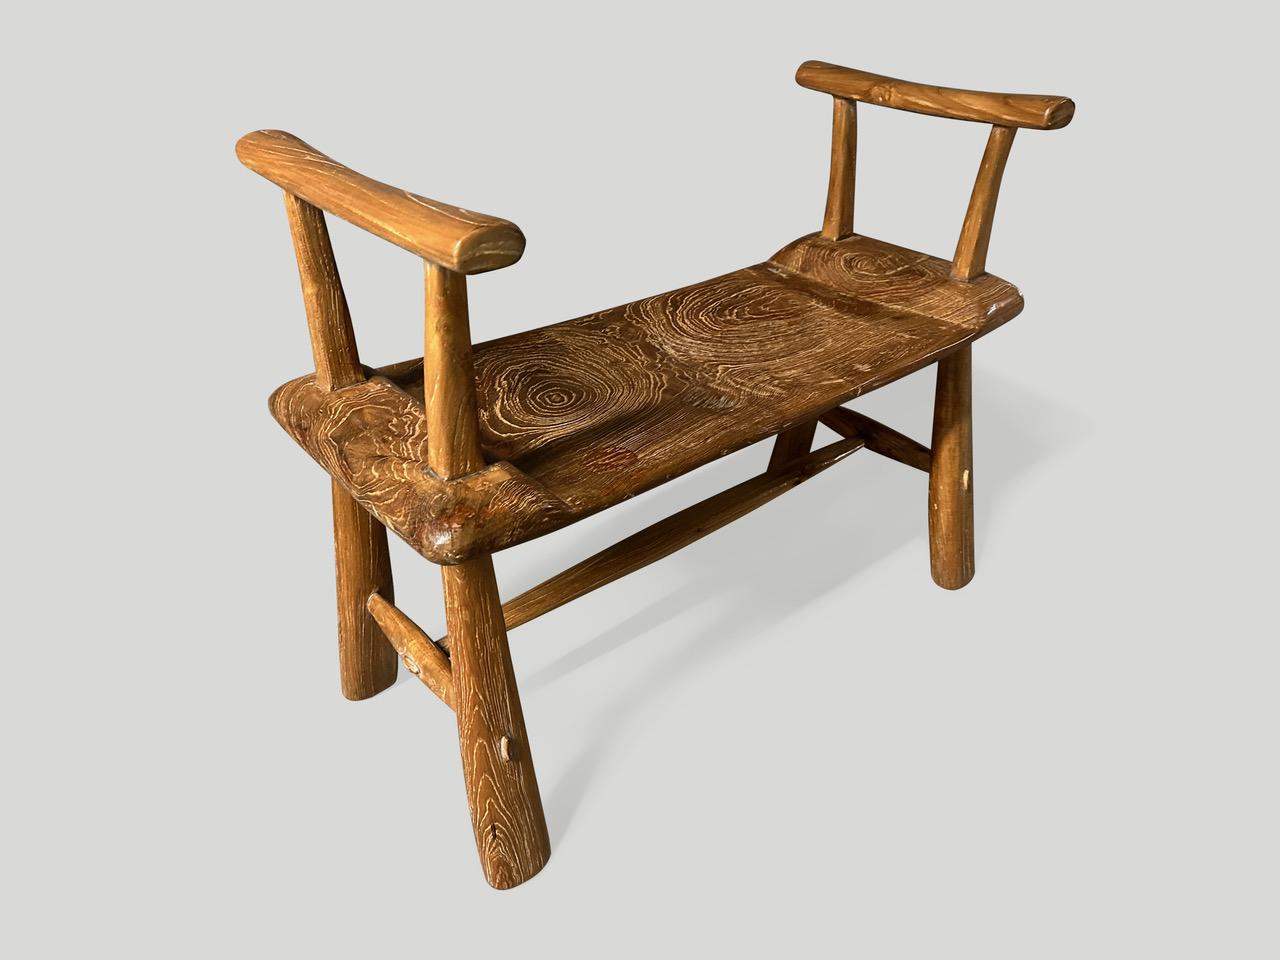 A single thick slab of reclaimed teak wood from my finest collection, is hand carved to produce this one of a kind bench with arms. We added mid century style legs and finished with a natural oil revealing the beautiful wood grain. Part of the Mid